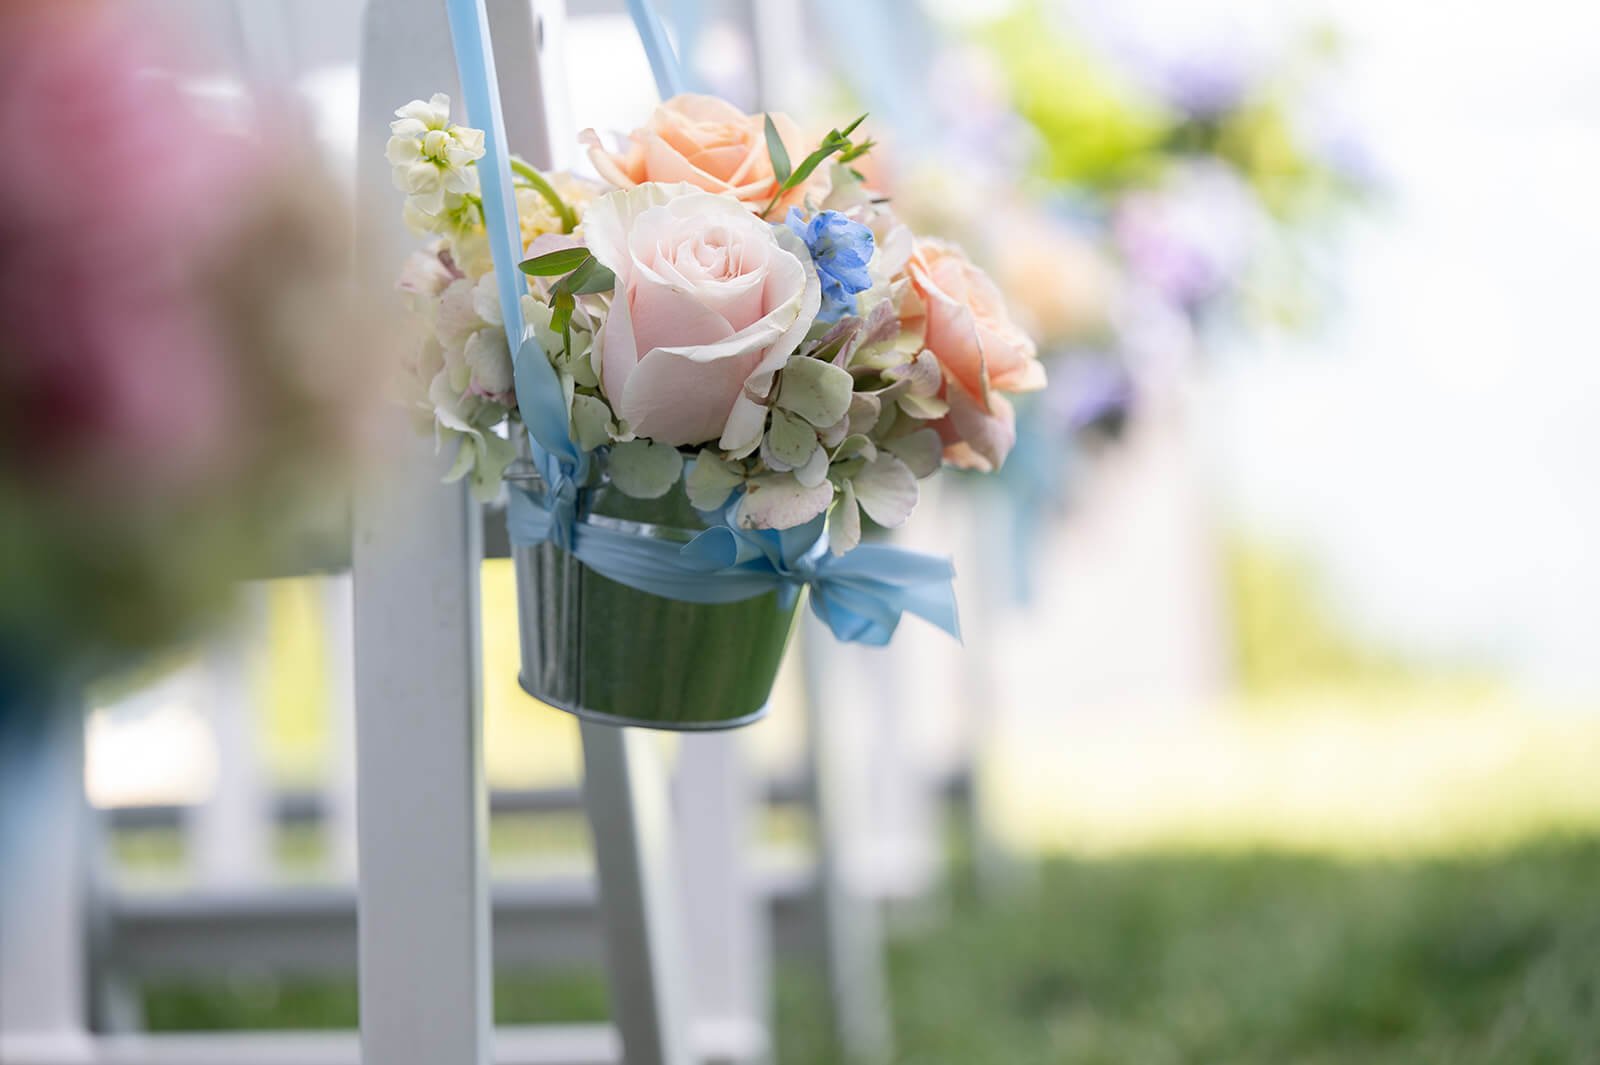 Hanging flowers down a wedding aisle